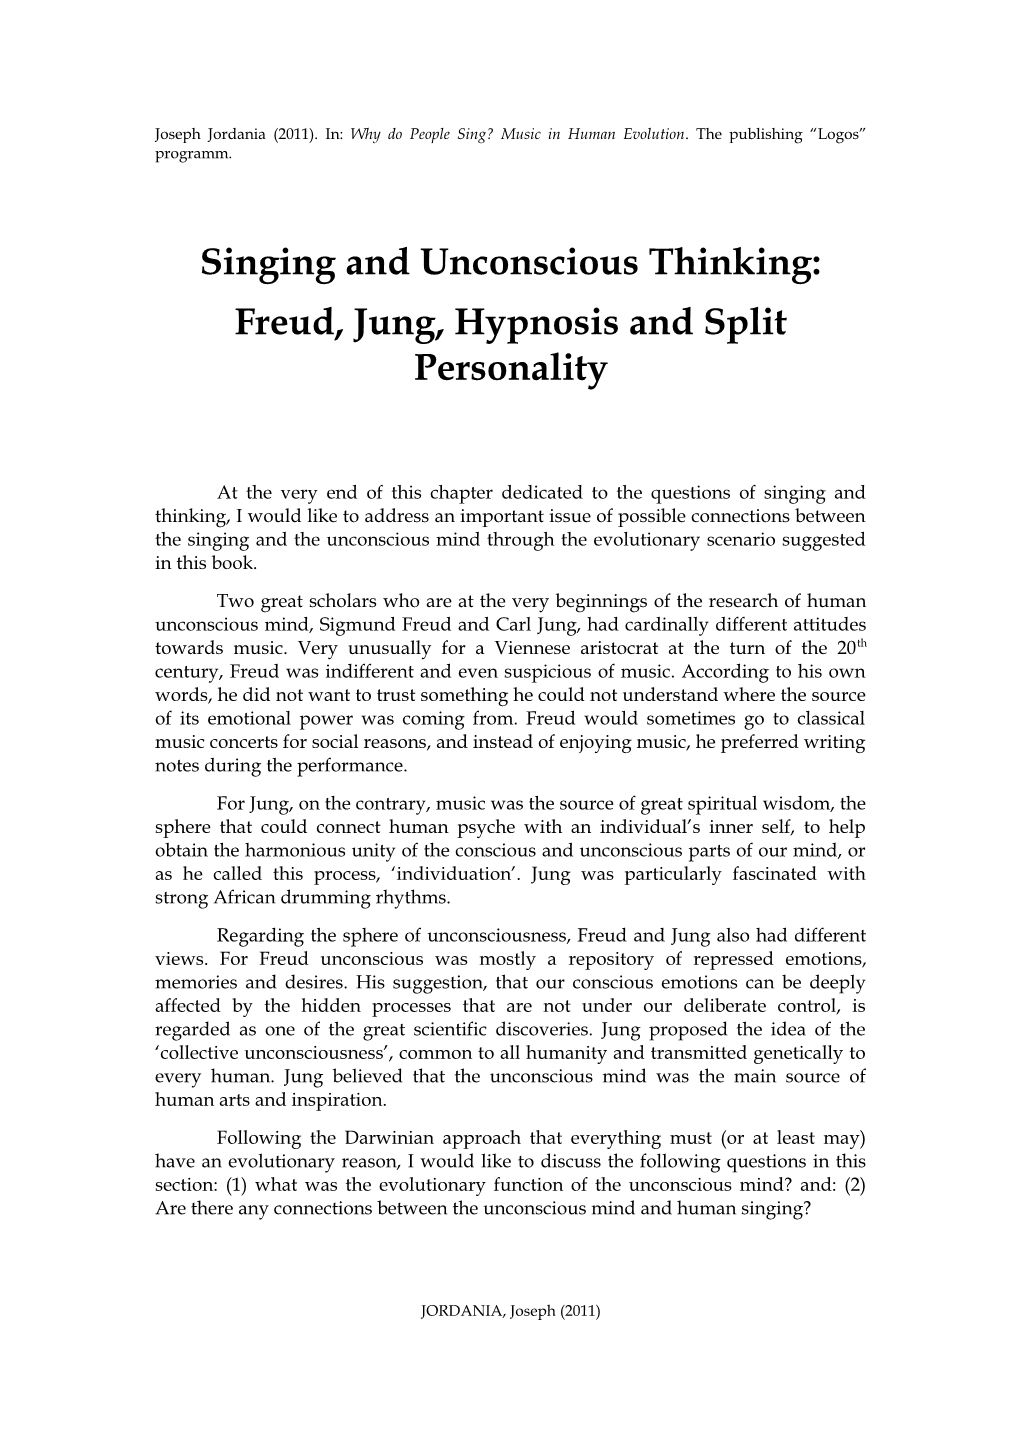 Singing and Unconscious Thinking: Freud, Jung, Hypnosis and Split Personality